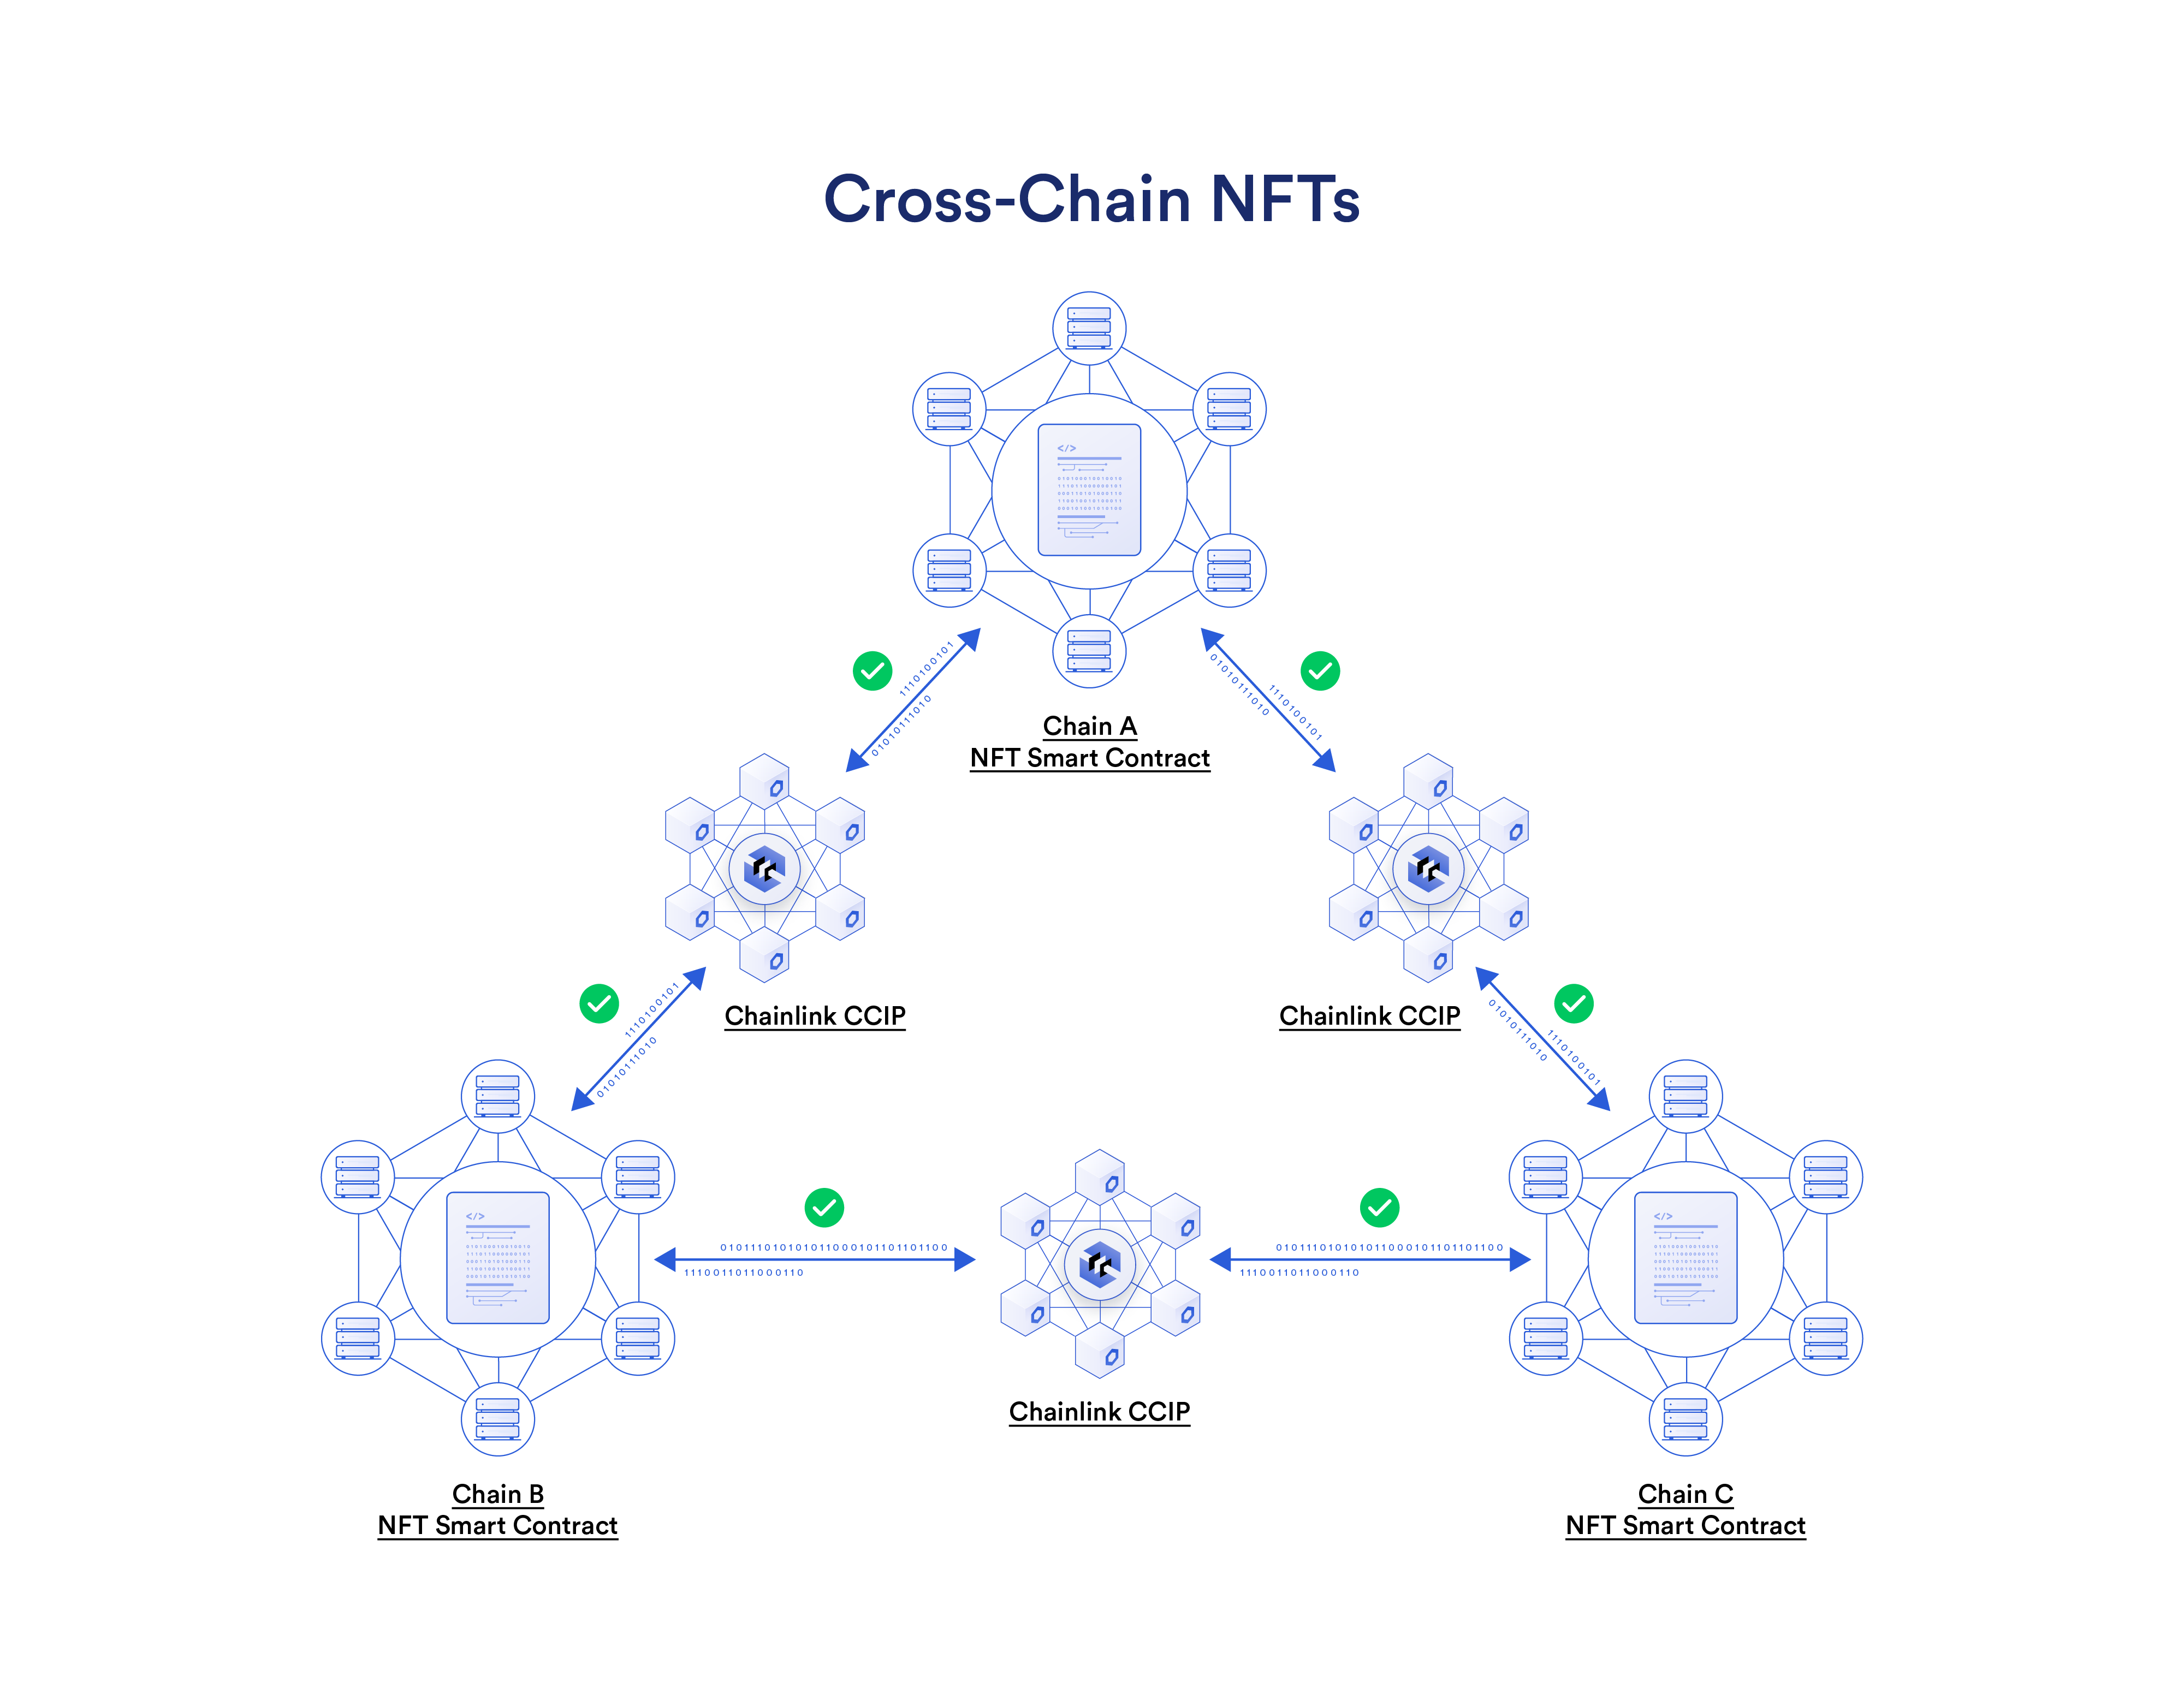 A diagram showing how NFT smart contracts can interoperate across chains to give users the ability to access them on any blockchain.